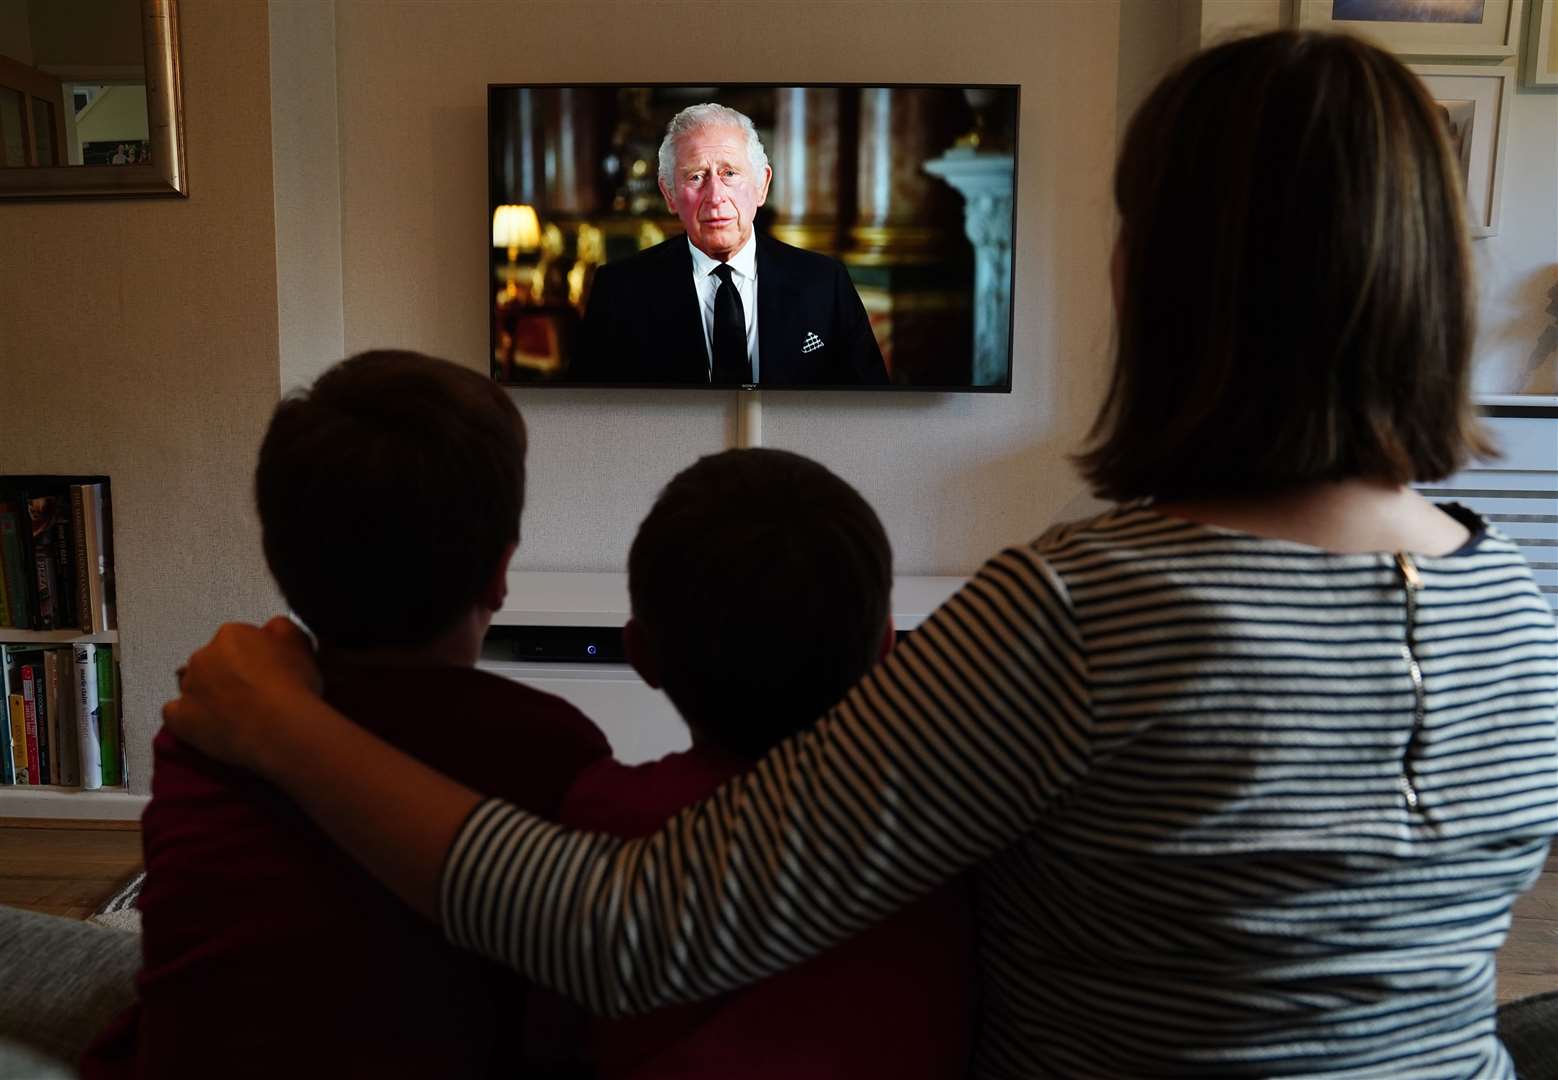 Ben, Isaac and Krystyna Rickett watching a broadcast of the King’s first address to the nation (Martin Rickett/PA)